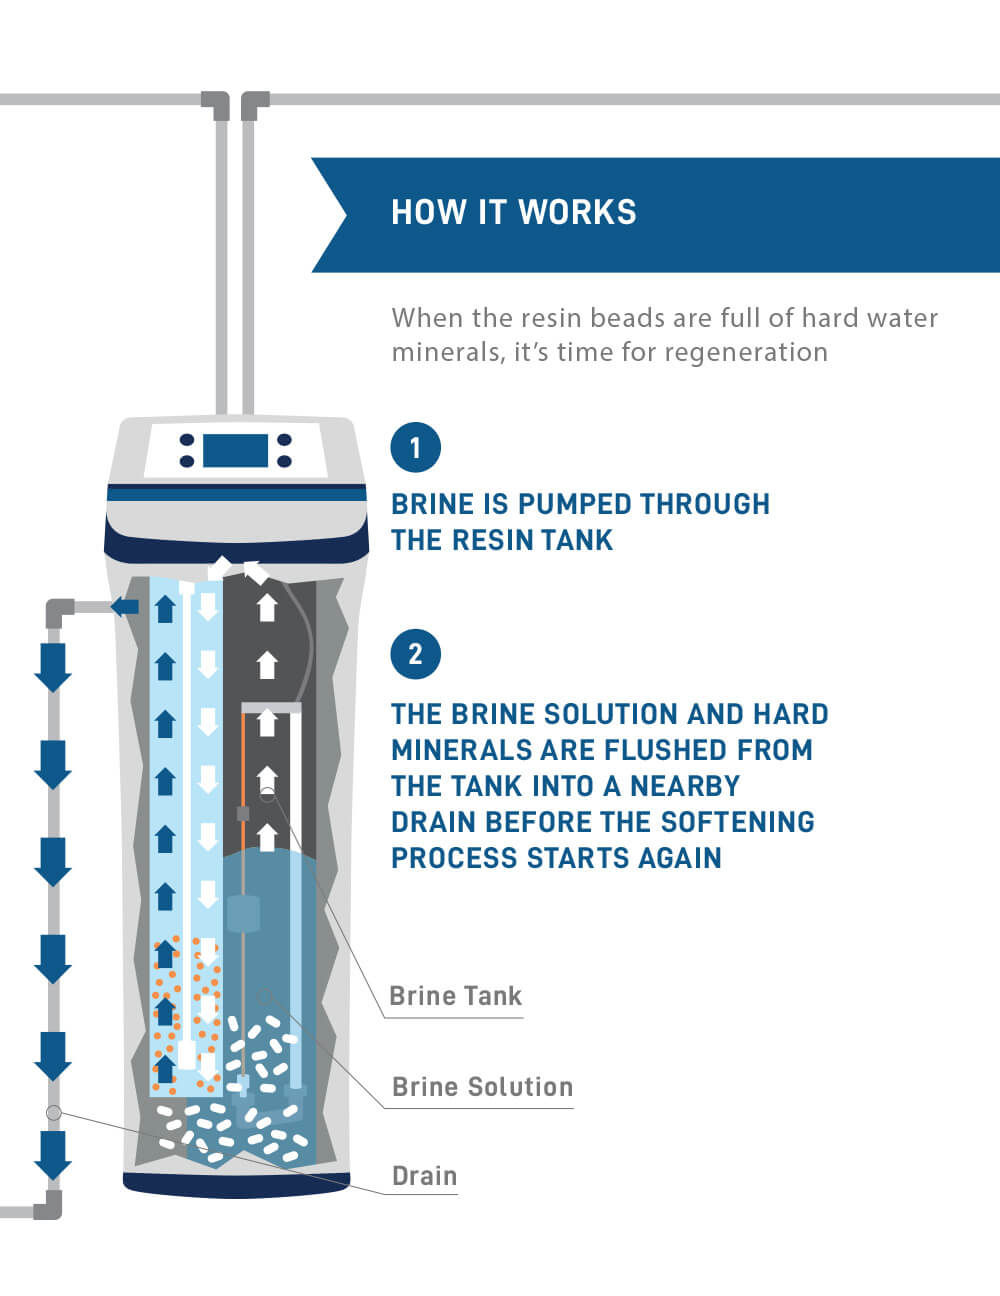 How the Water Softening System Regeneration Works